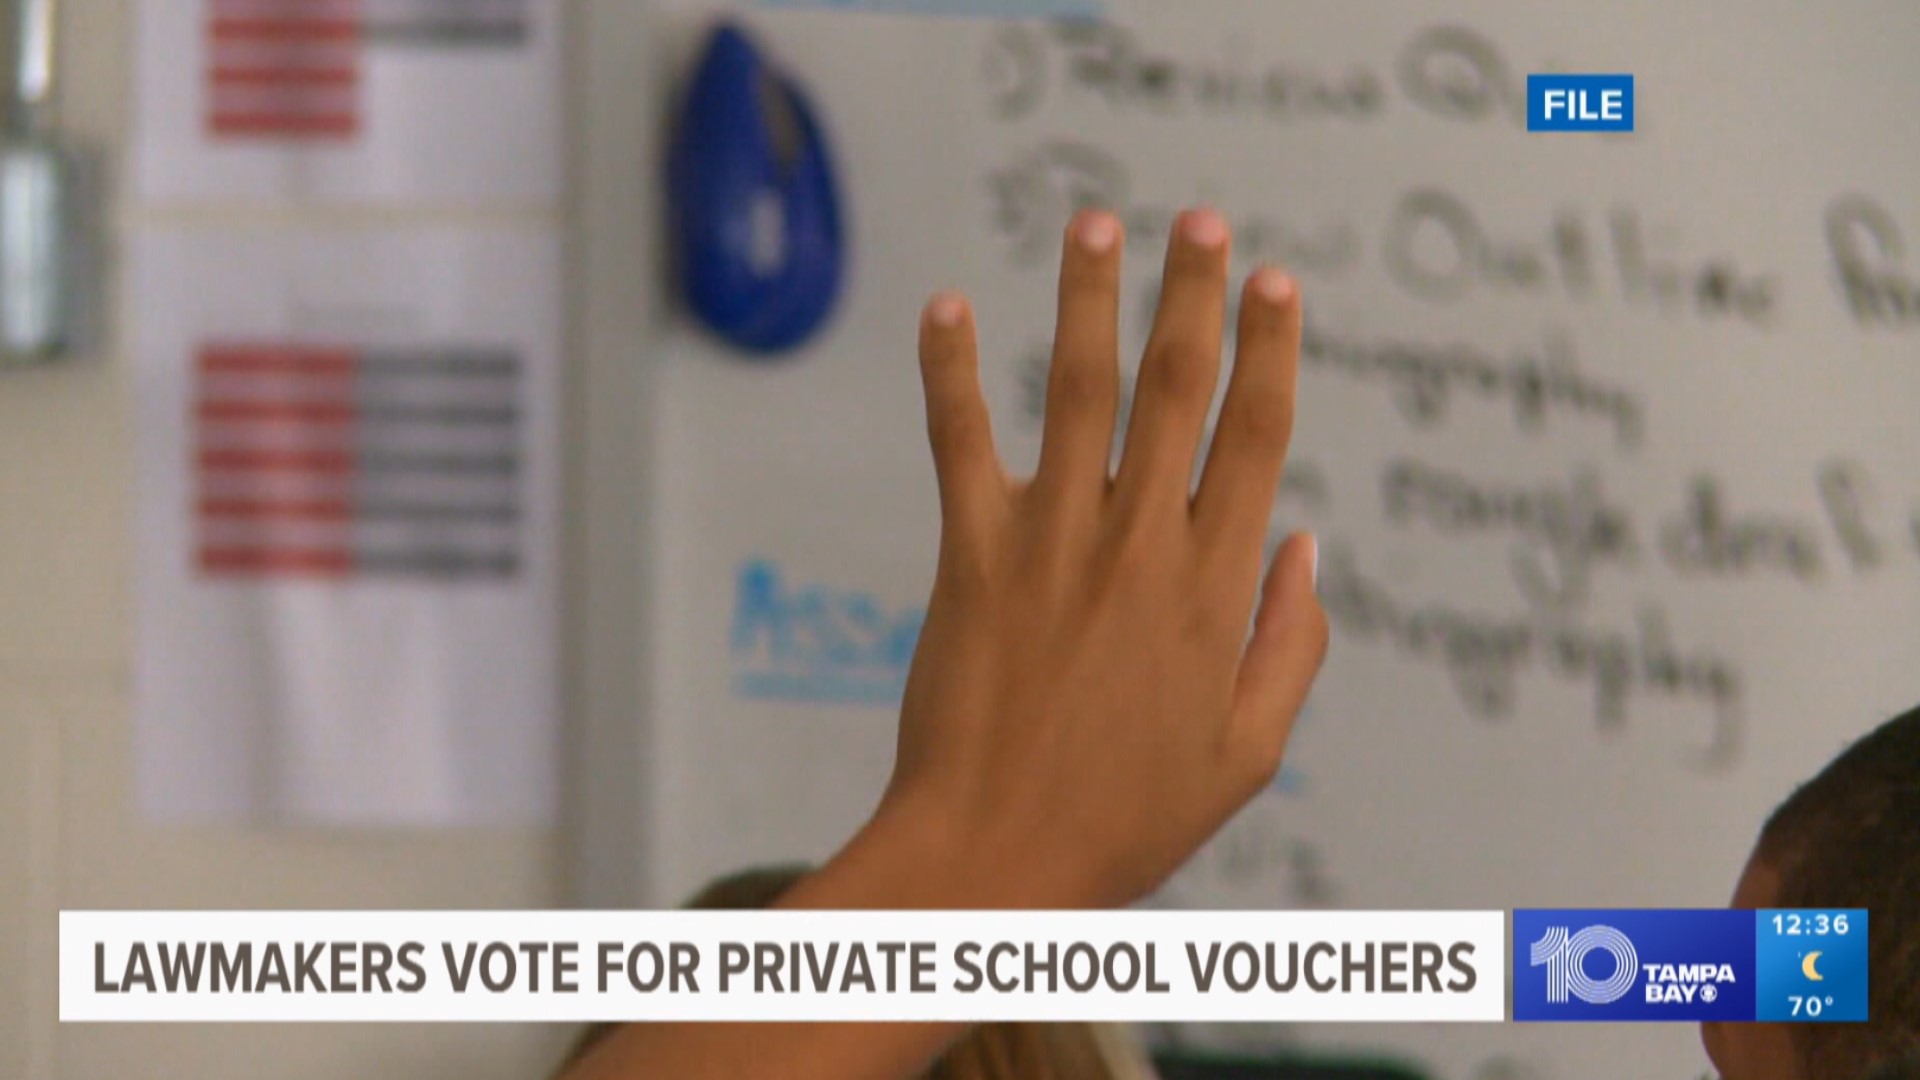 The expansion allows for any students living in Florida to get a voucher that they can use to attend participating private schools.